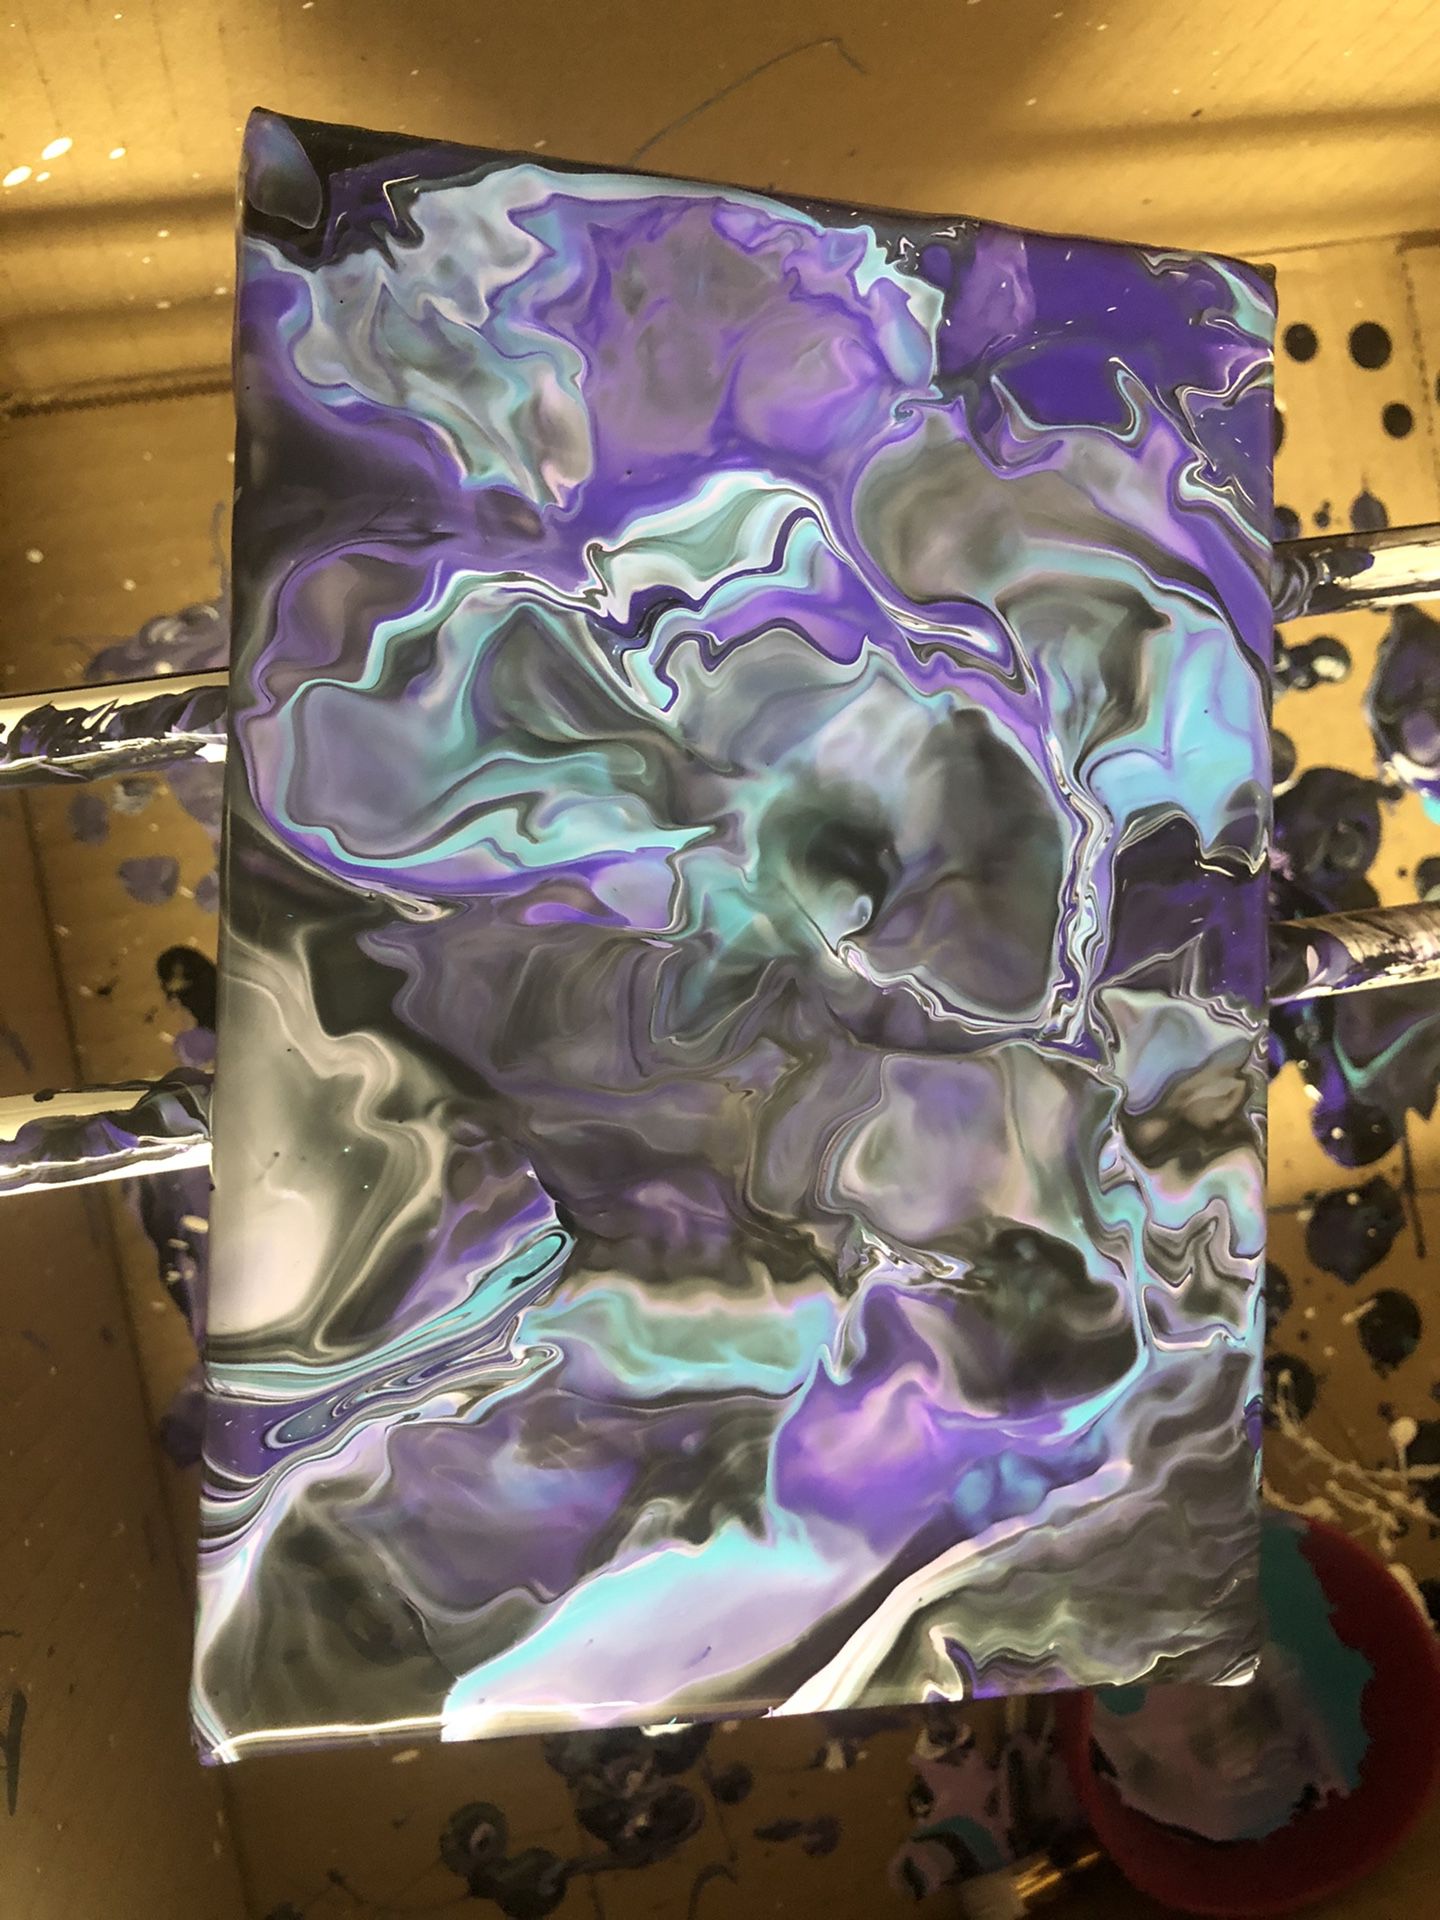 Pour painting